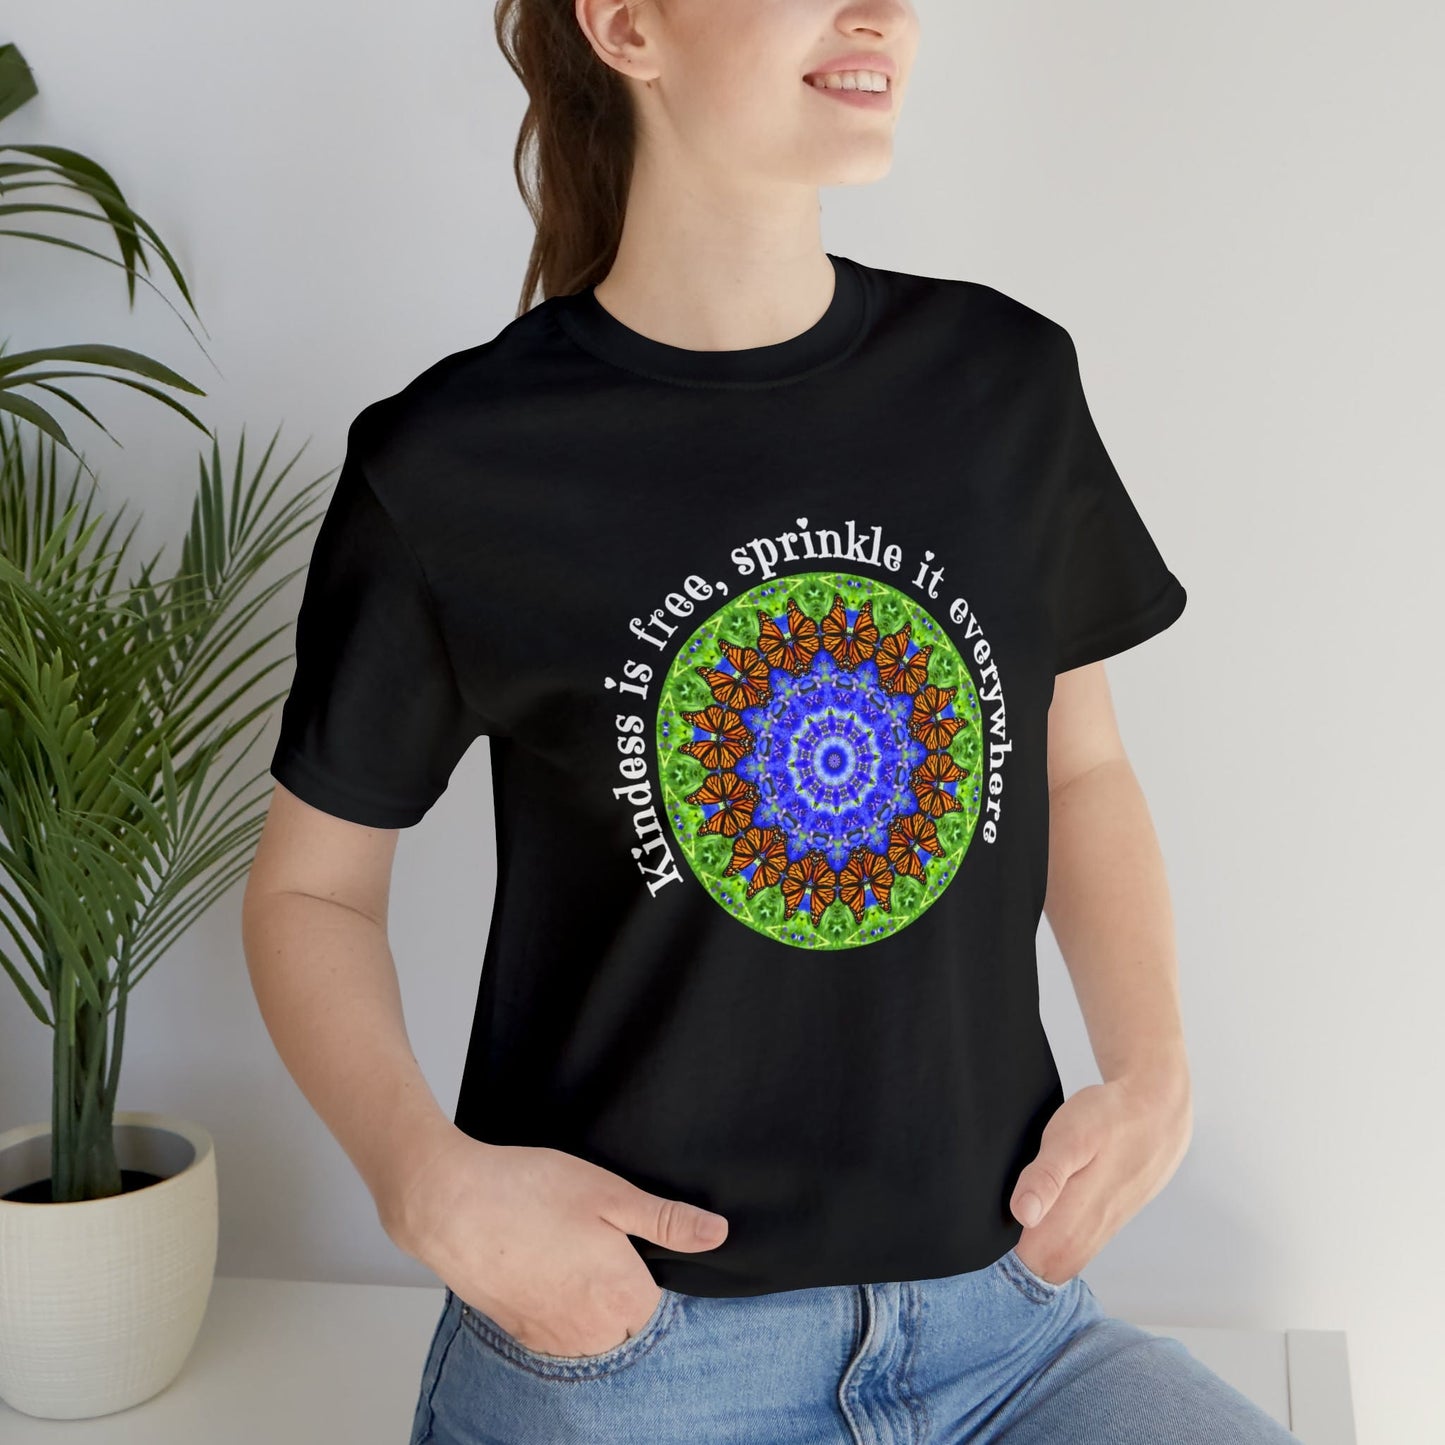 Cottage Core Be Kind Butterfly Shirt featuring Stunning Mandala Art - Graphic Tees for Nature Lovers Black